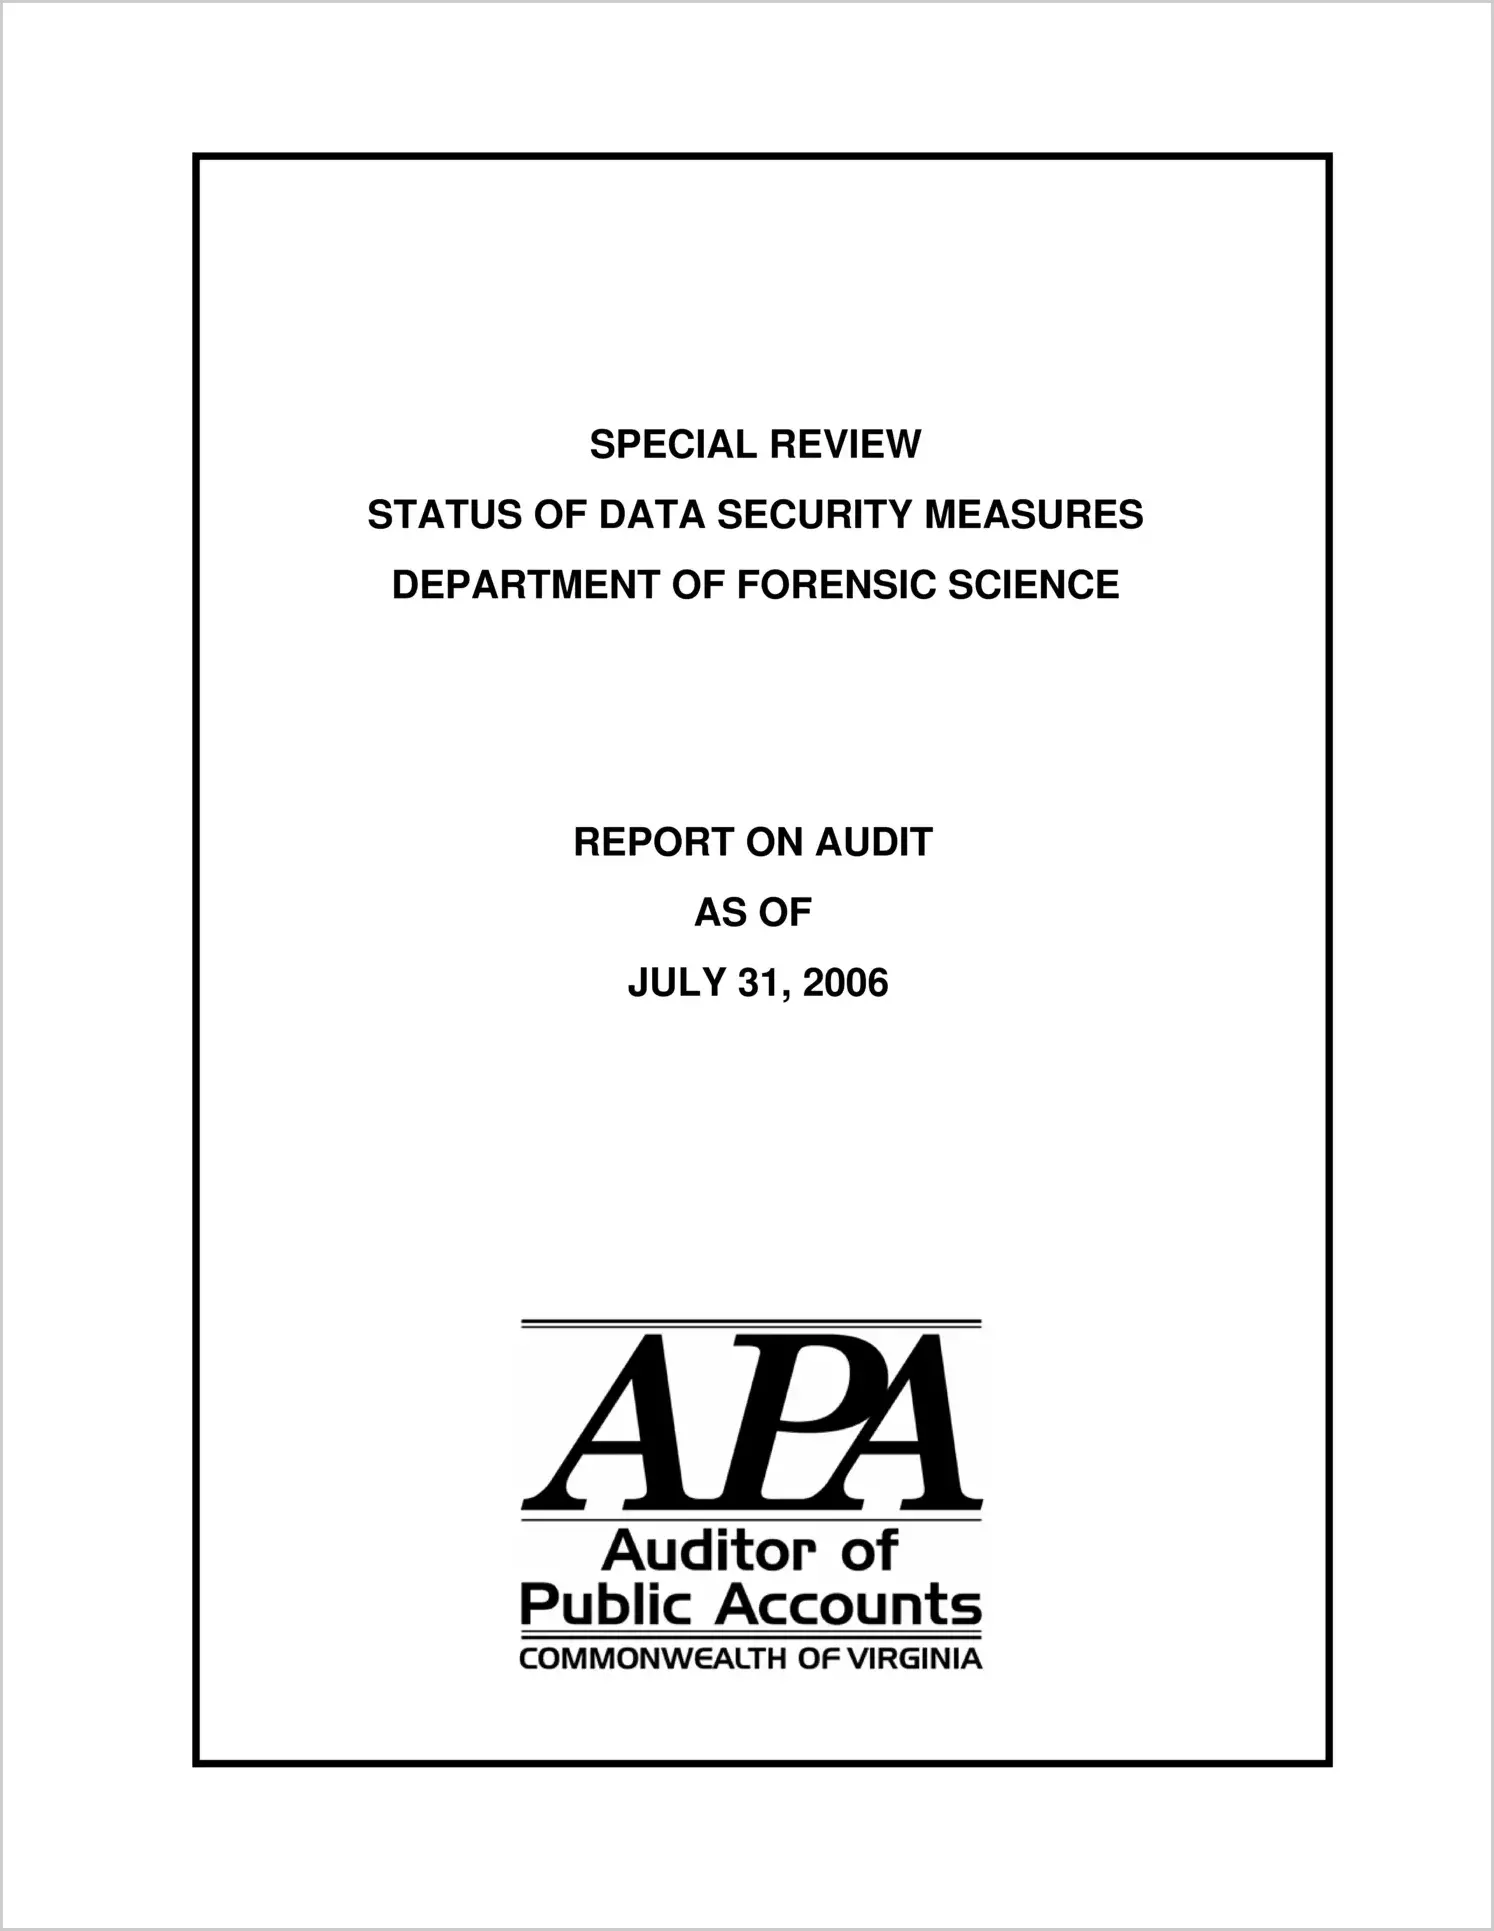 Special Review Status of Data Security Measures Department of Forensic Science Report on Audit as of July 31, 2006